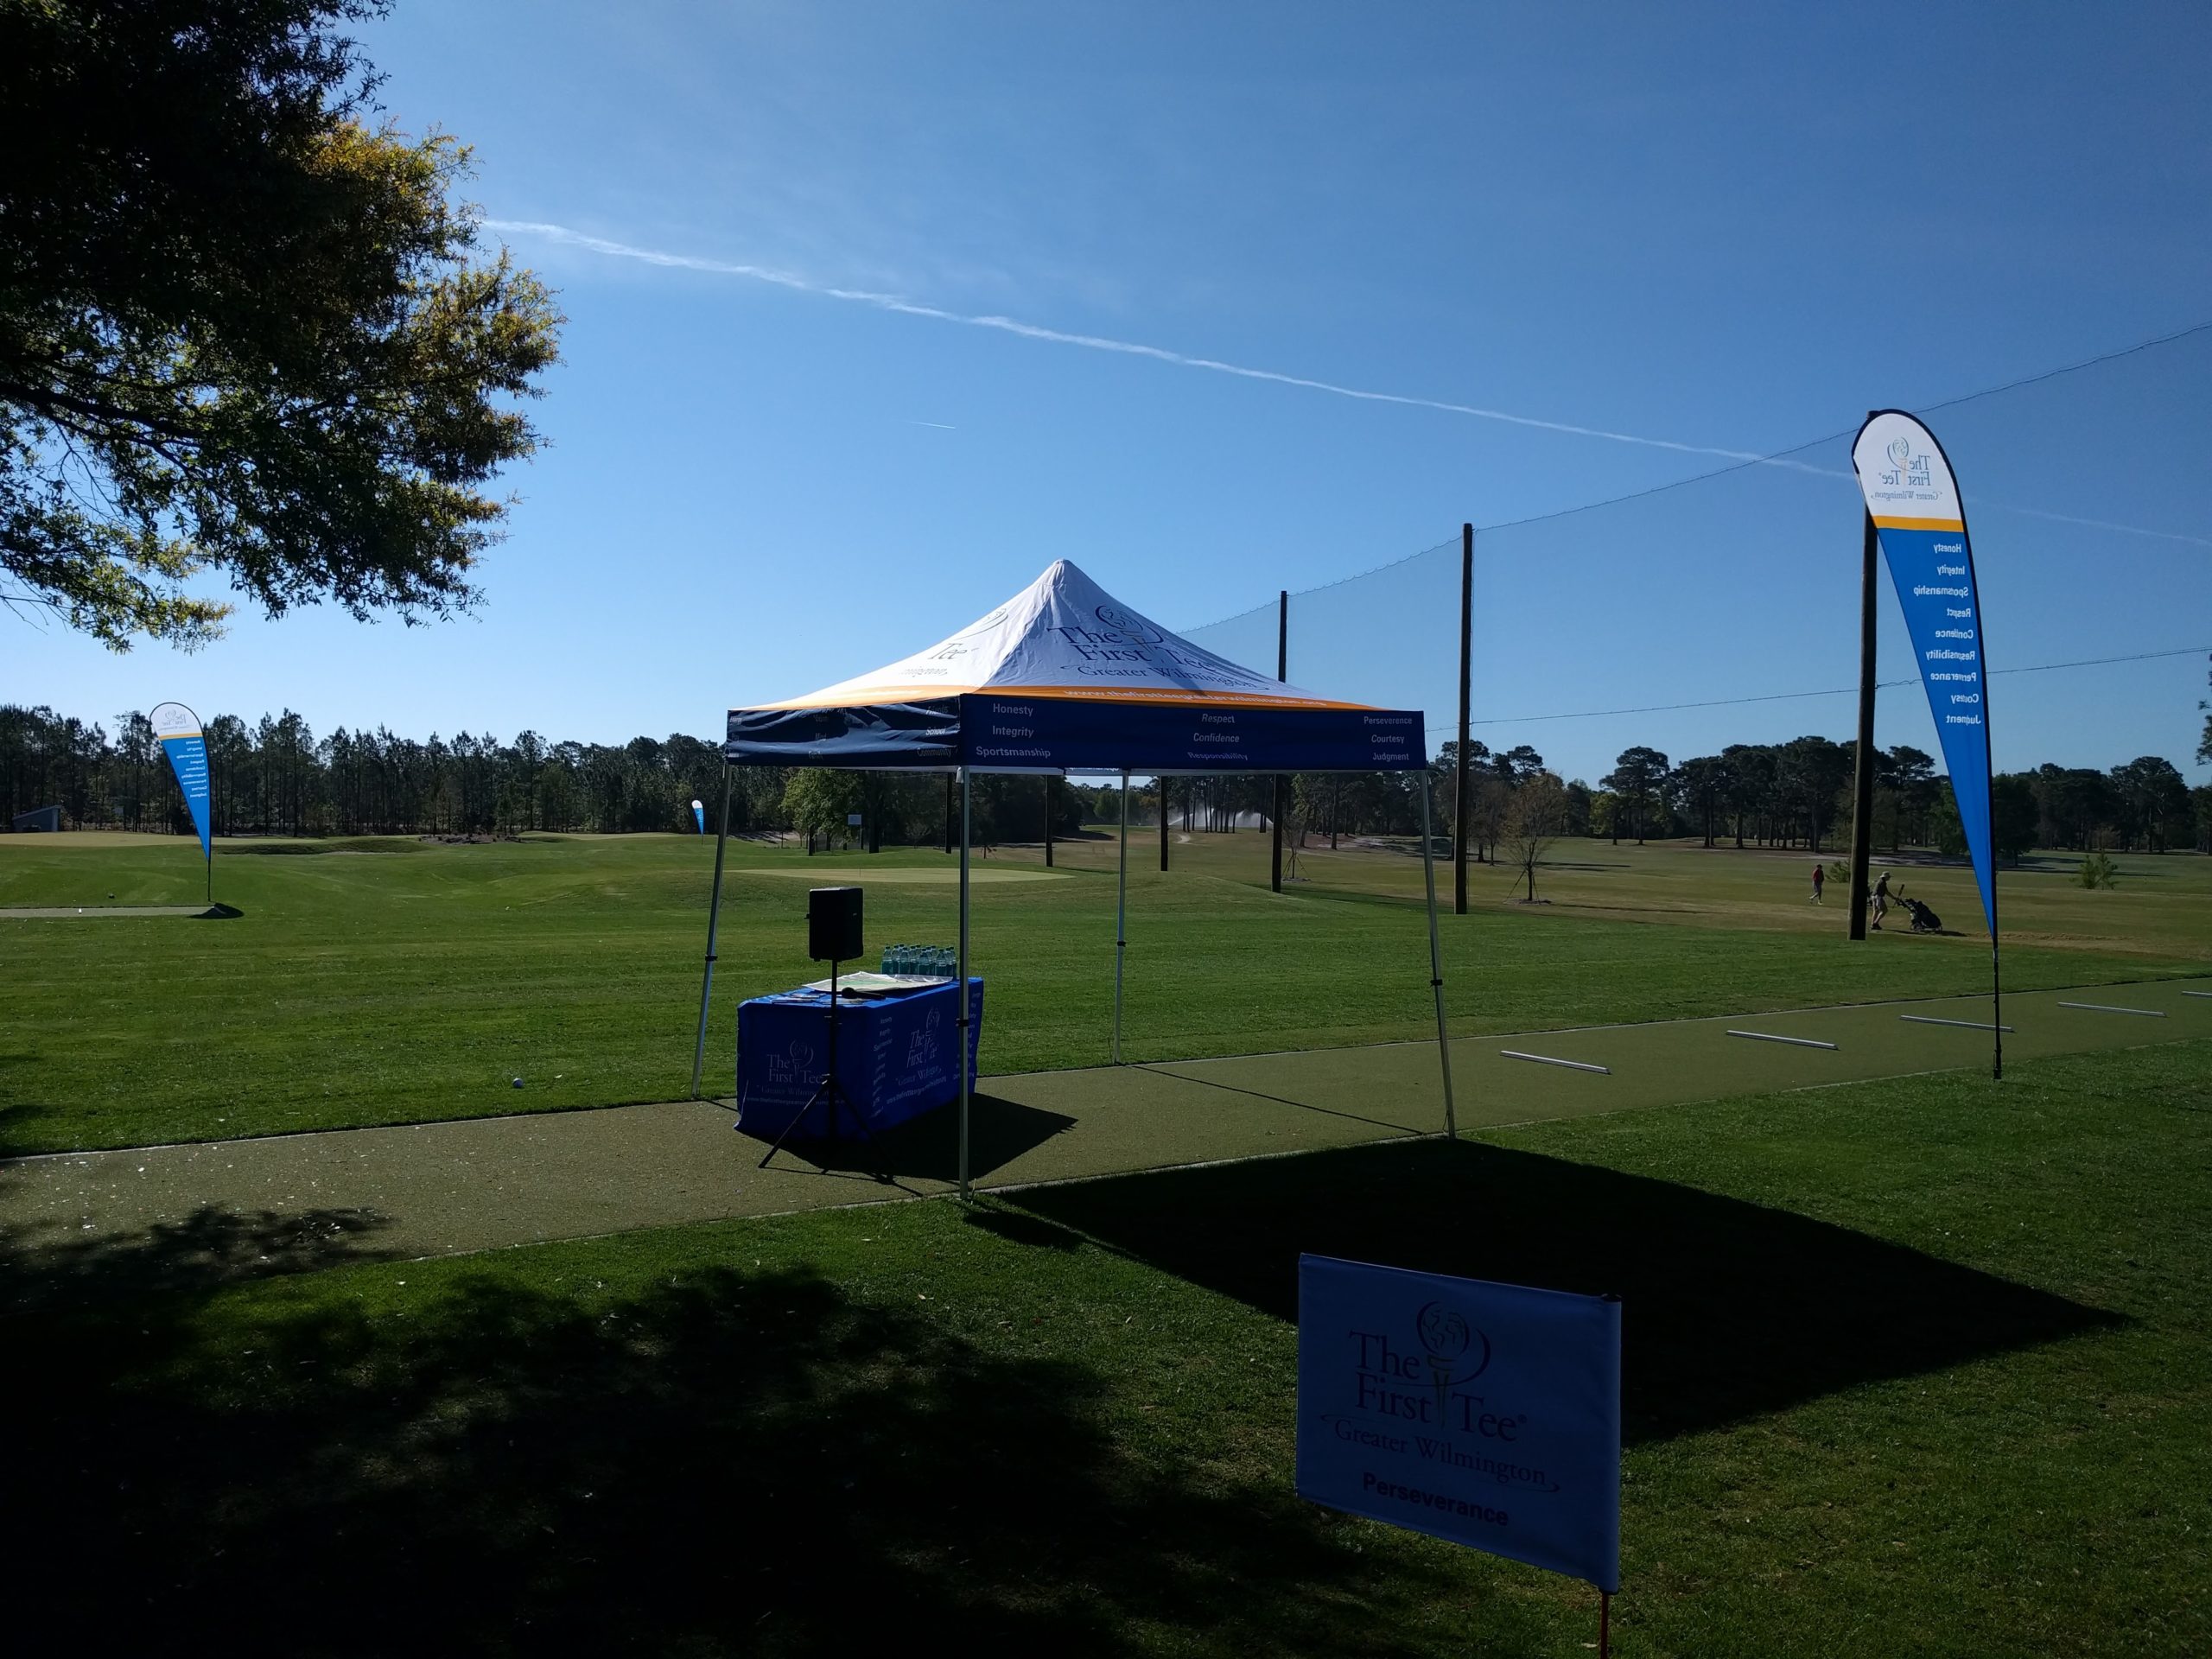 The First Tee of Greater Wilmington